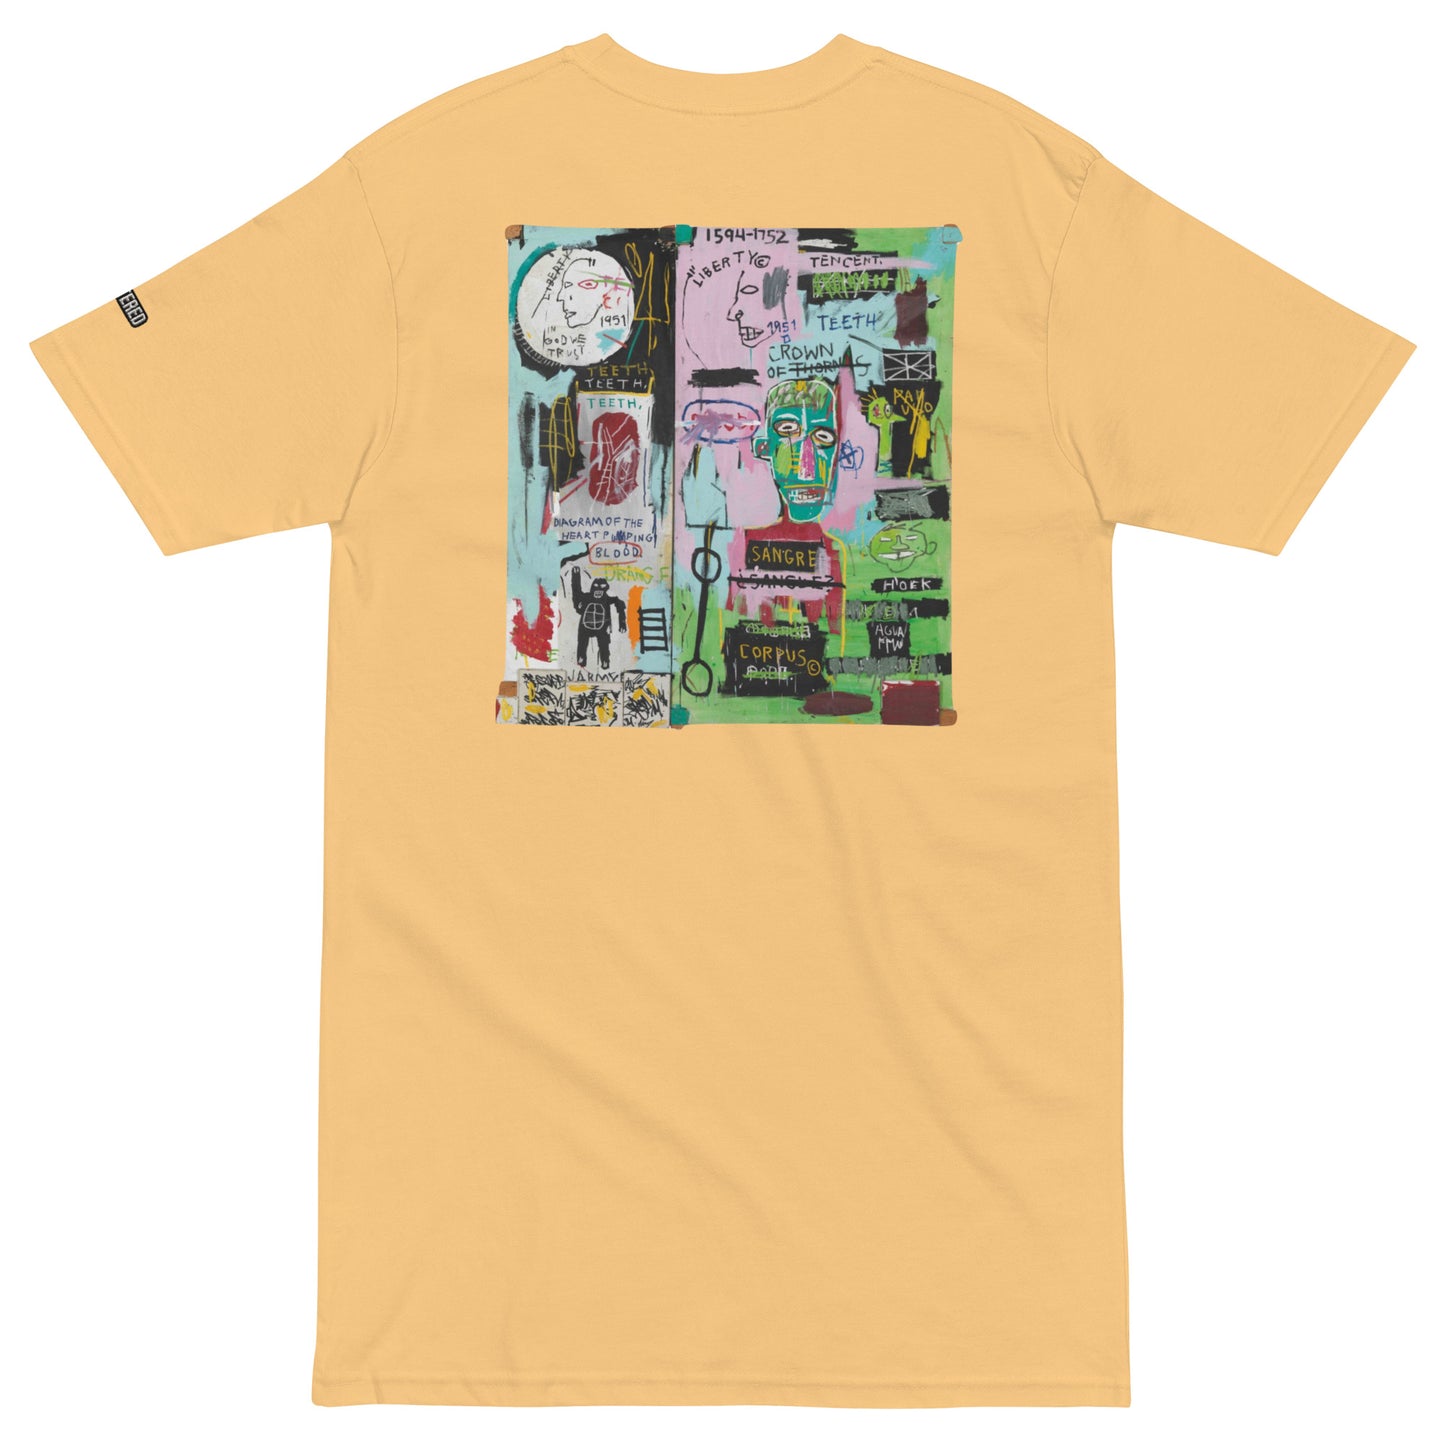 Jean-Michel Basquiat "In Italian" Artwork Embroidered and Printed Premium Yellow Streetwear T-Shirt Scattered